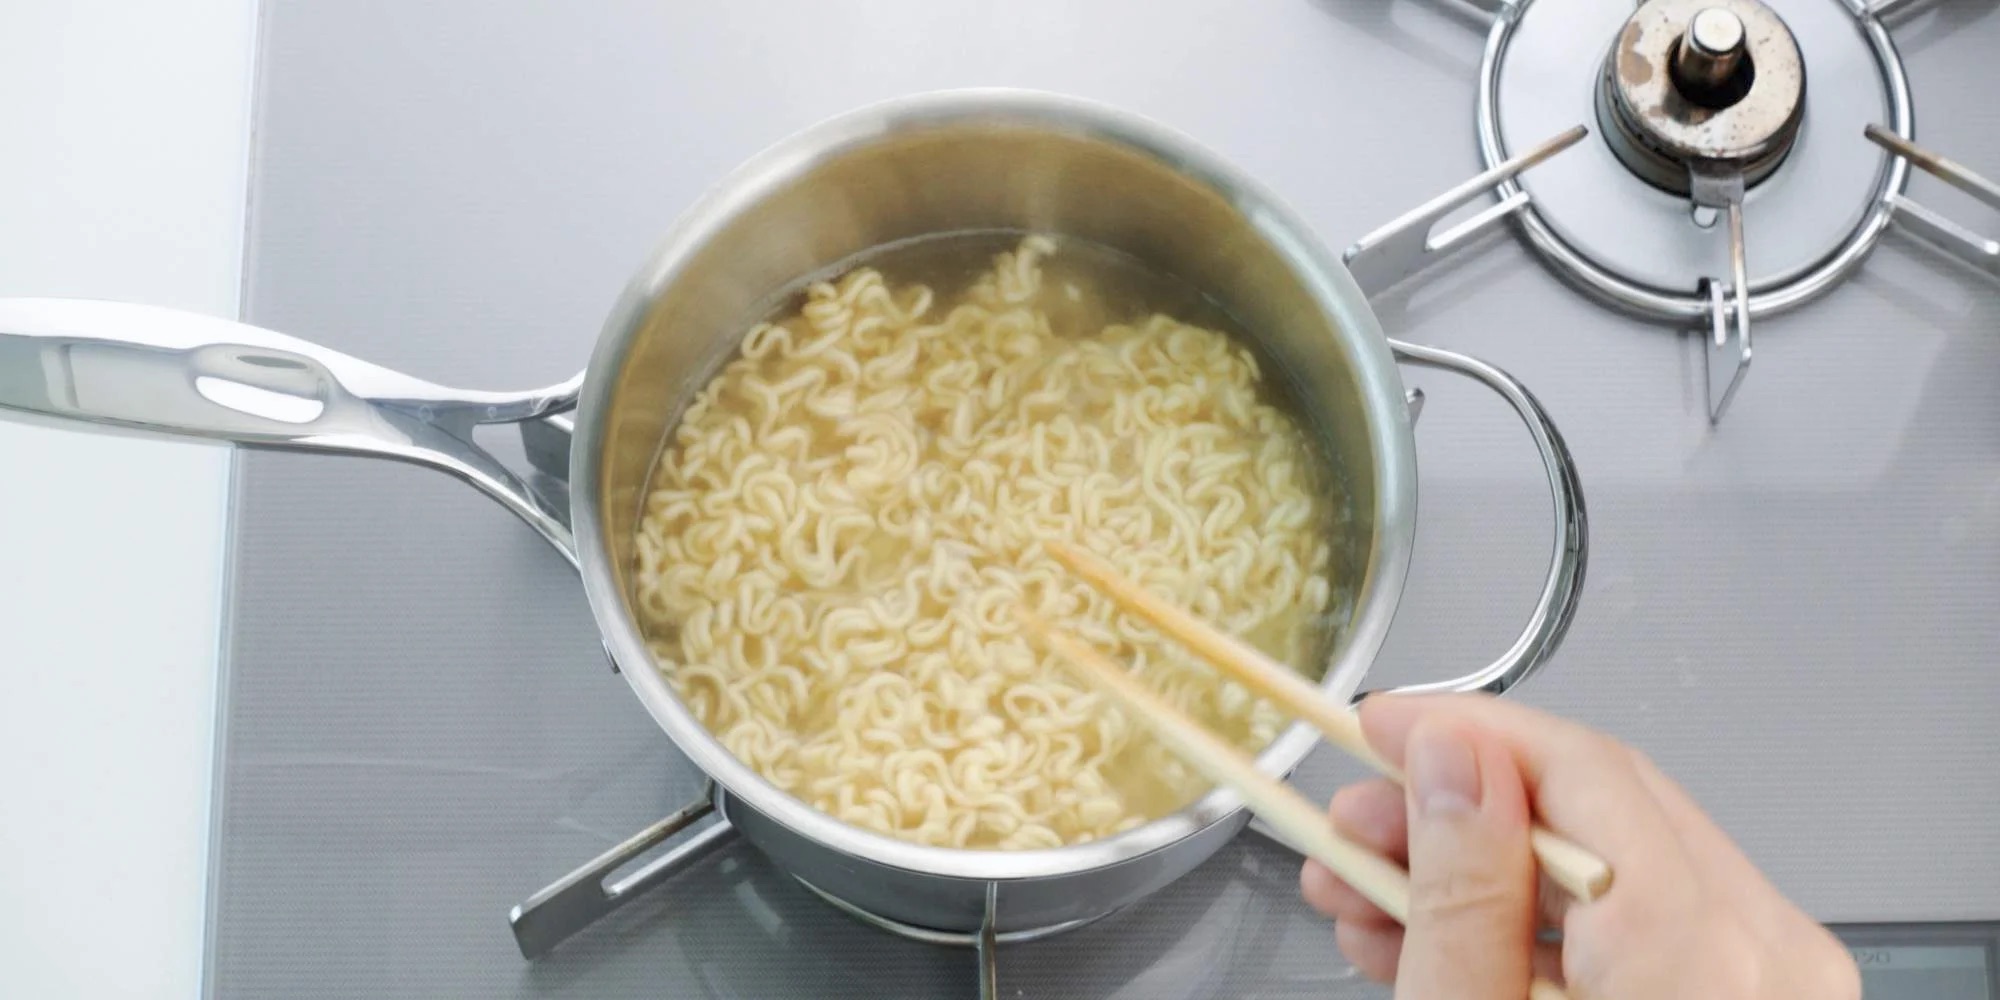 How To Cook Ramen On Stove Top